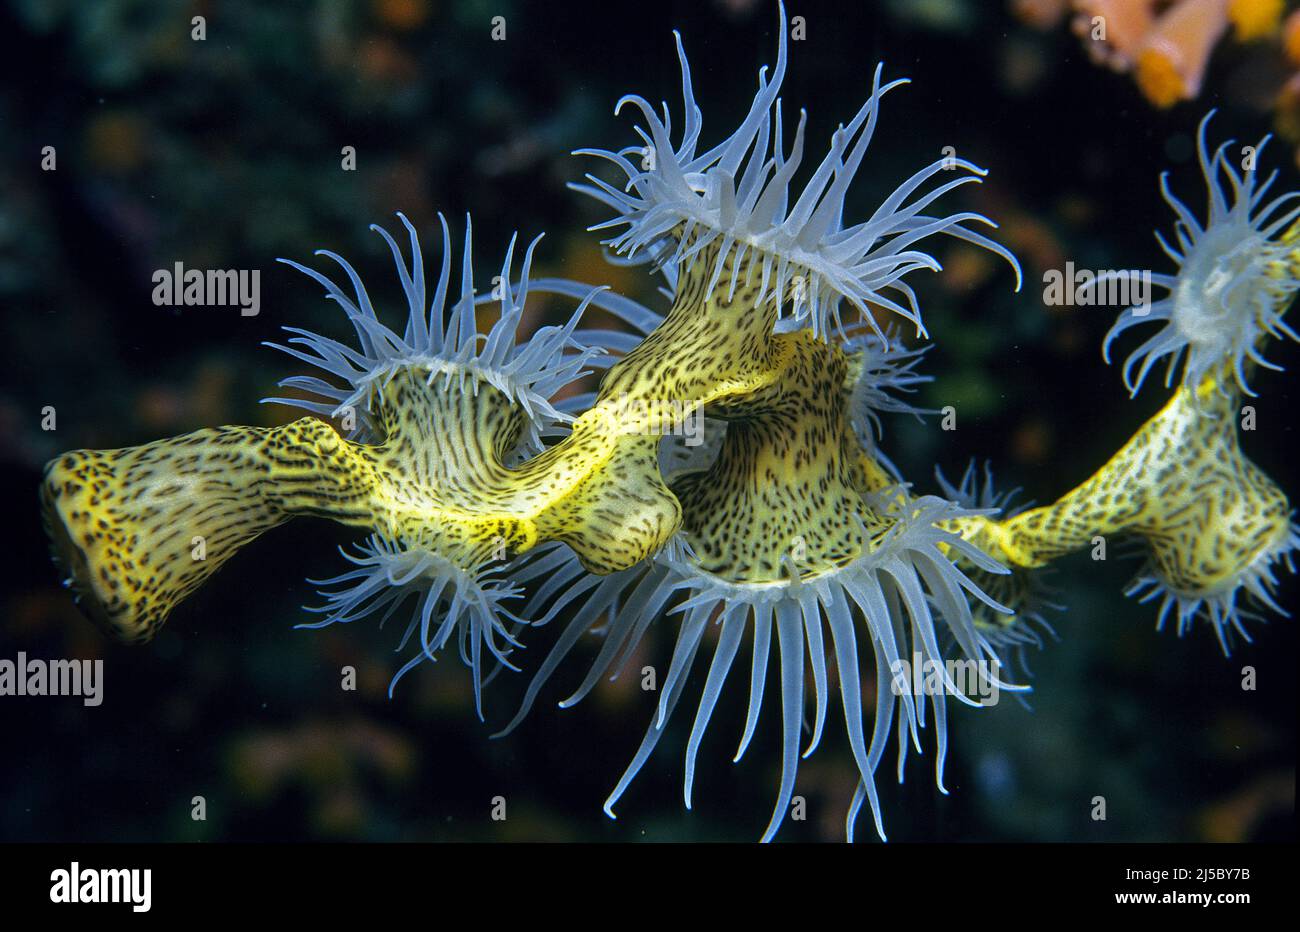 Gorgonian wrapper, colonial anemone or Zebra Striped Gorgonian Wrapper (Nemanthus annamensis), at night, Maldives, Indian ocean, Asia Stock Photo